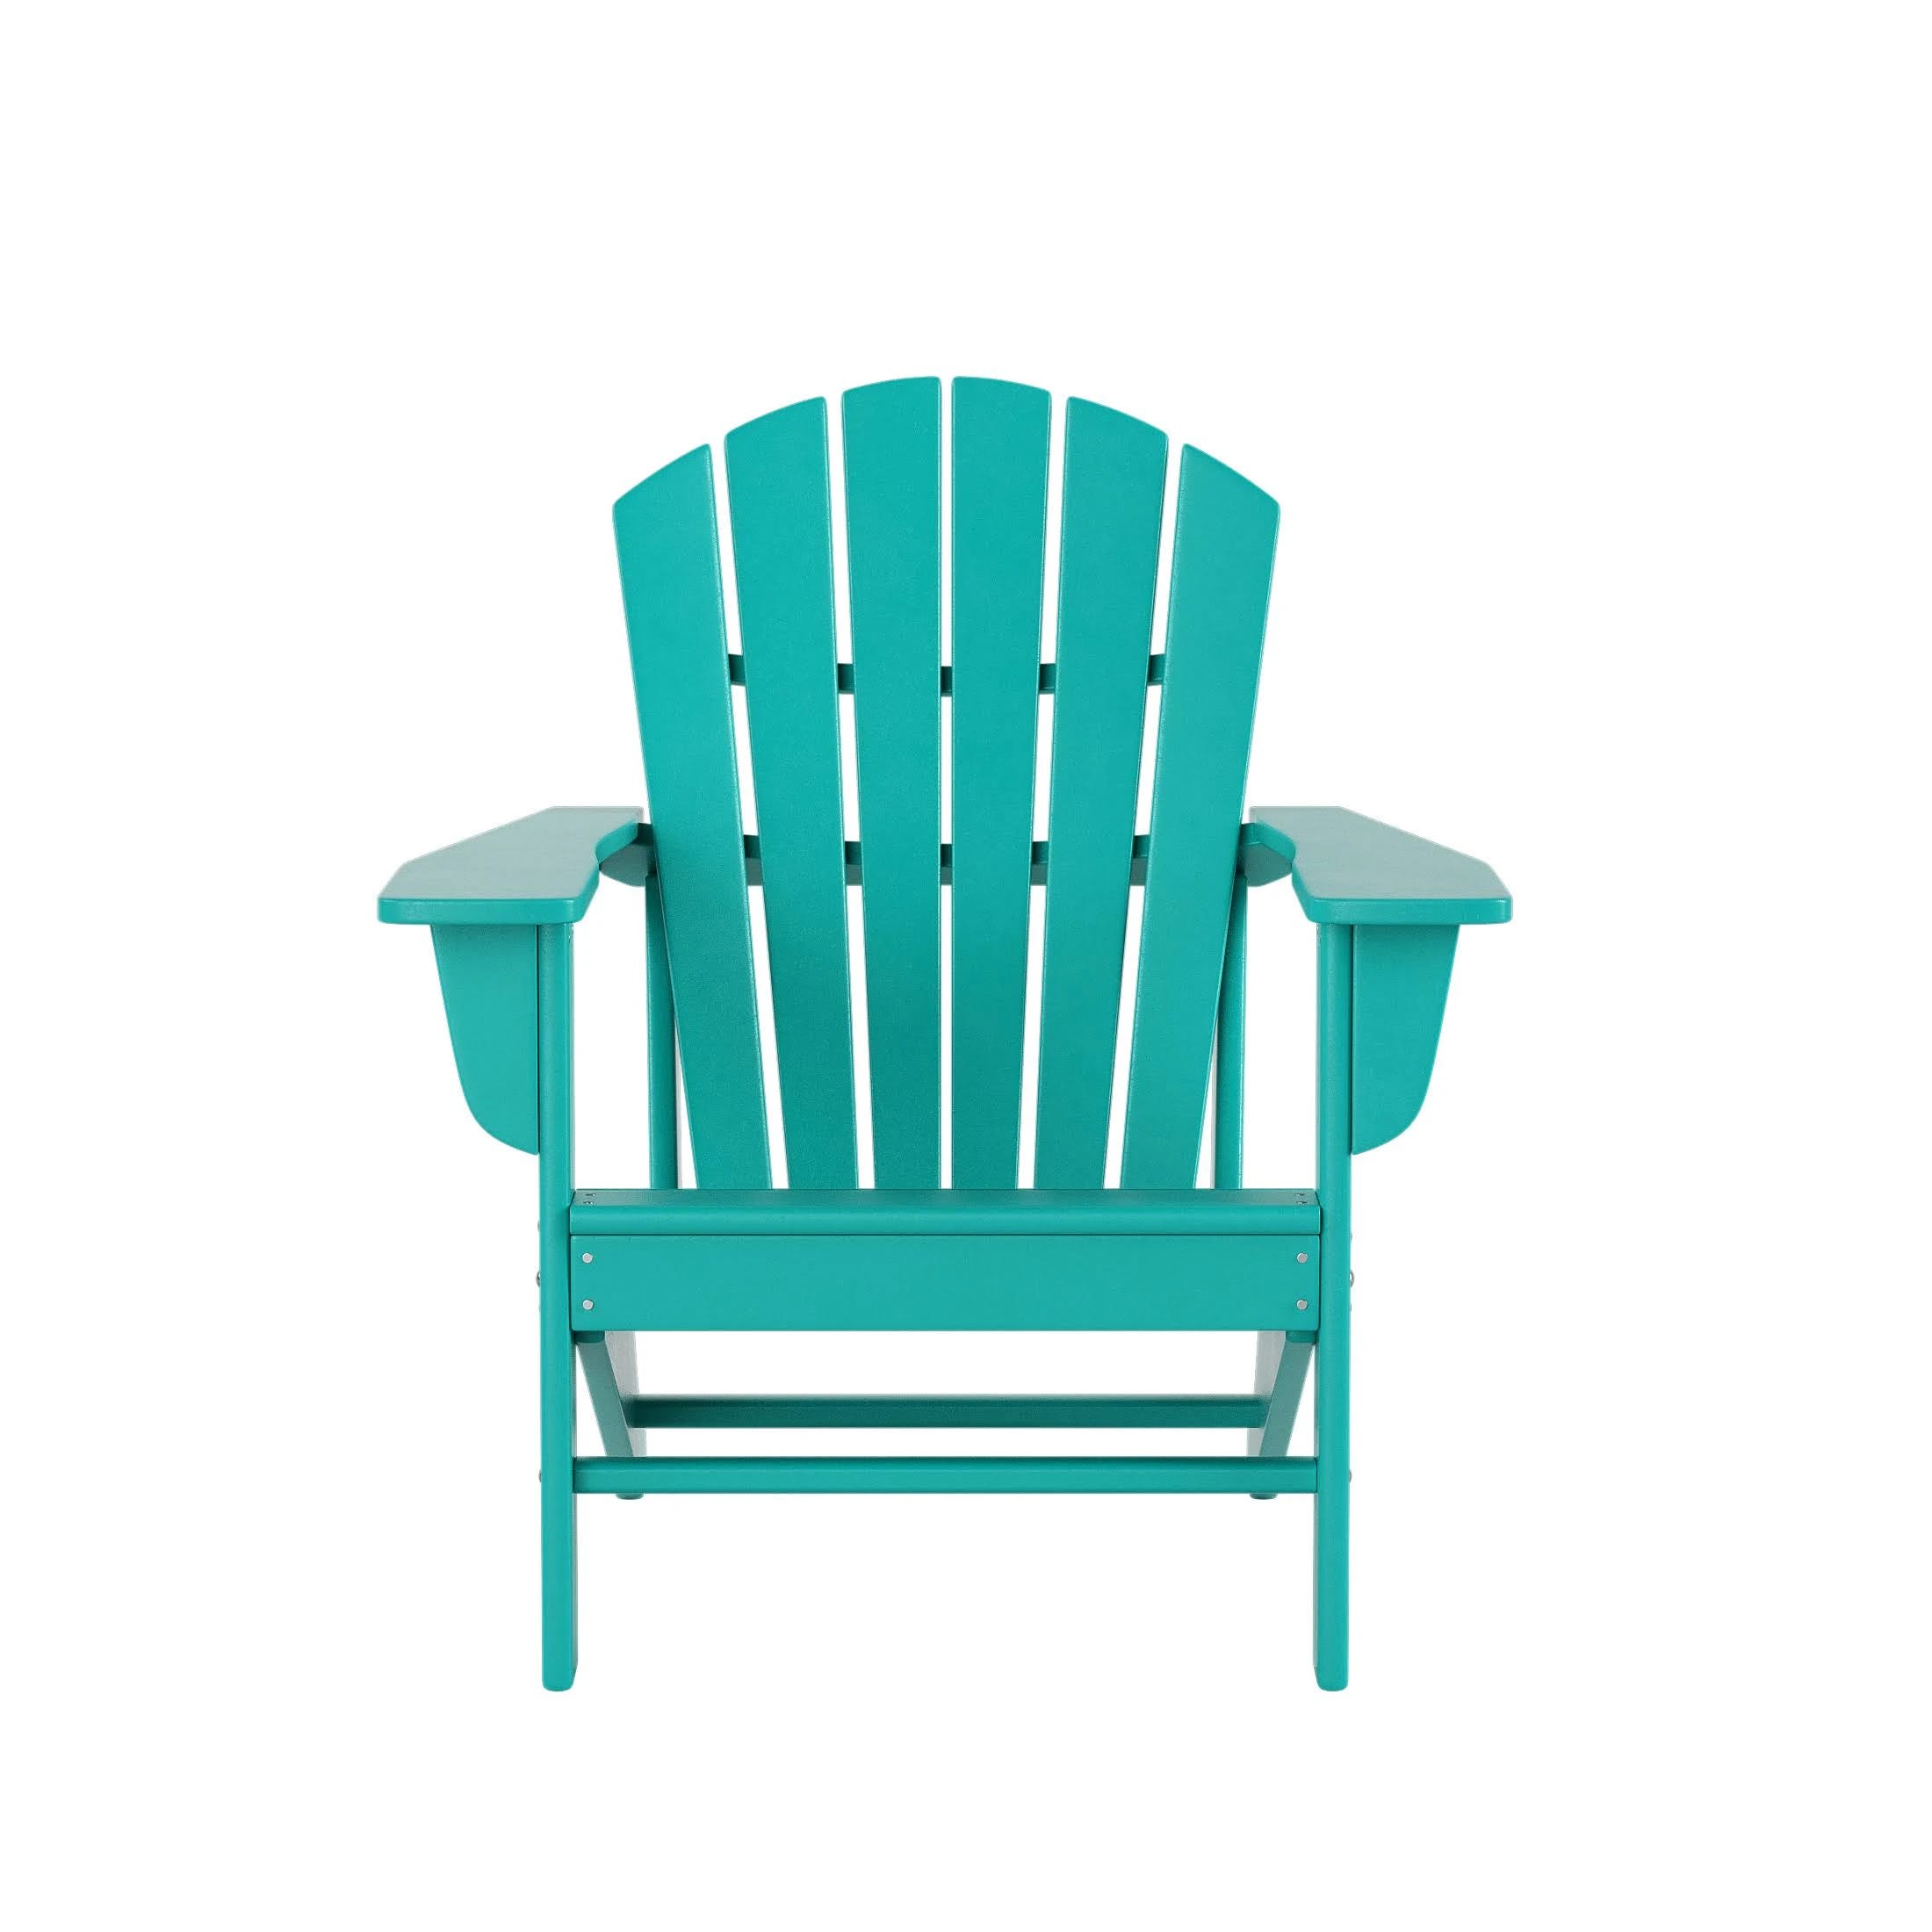 Westintrends Turquoise Outdoor Patio Adirondack Chair | Image